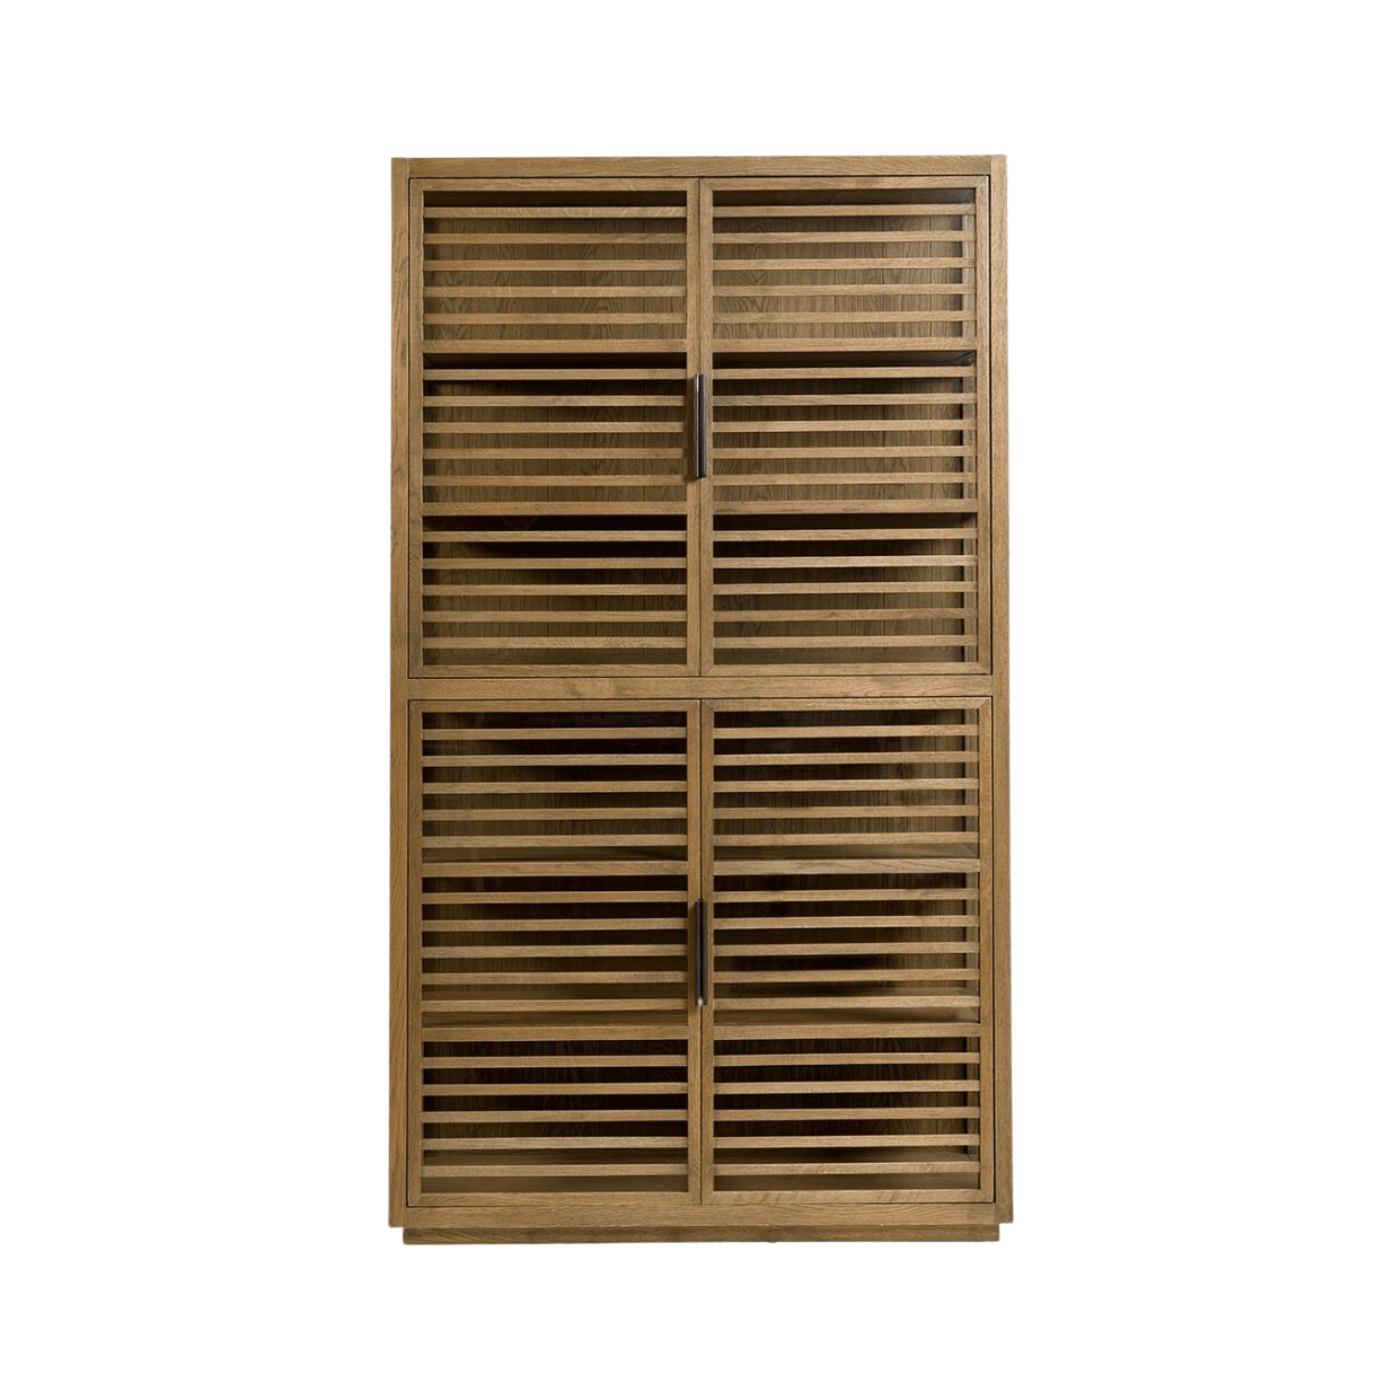 Granada Natural Oak Cabinet with Tempered Glass Doors - Maison Rêves UK